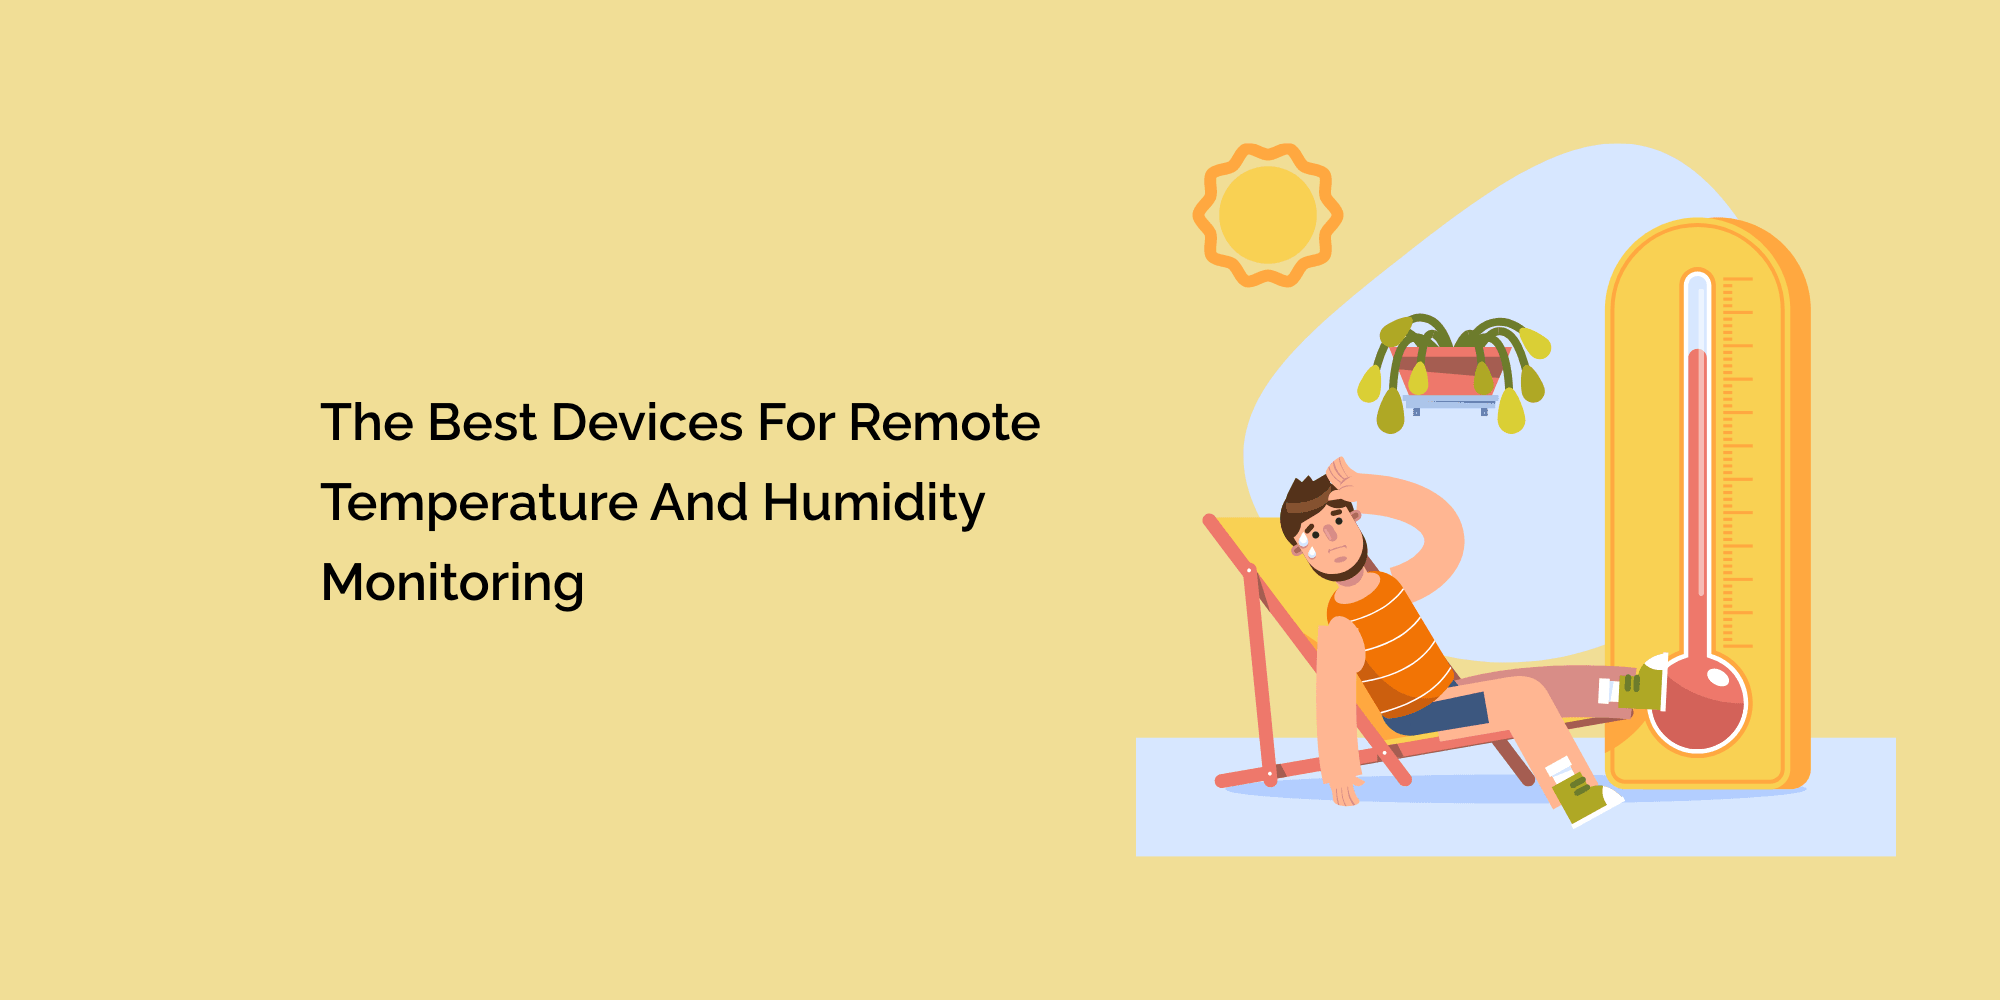 The Best Devices for Remote Temperature and Humidity Monitoring